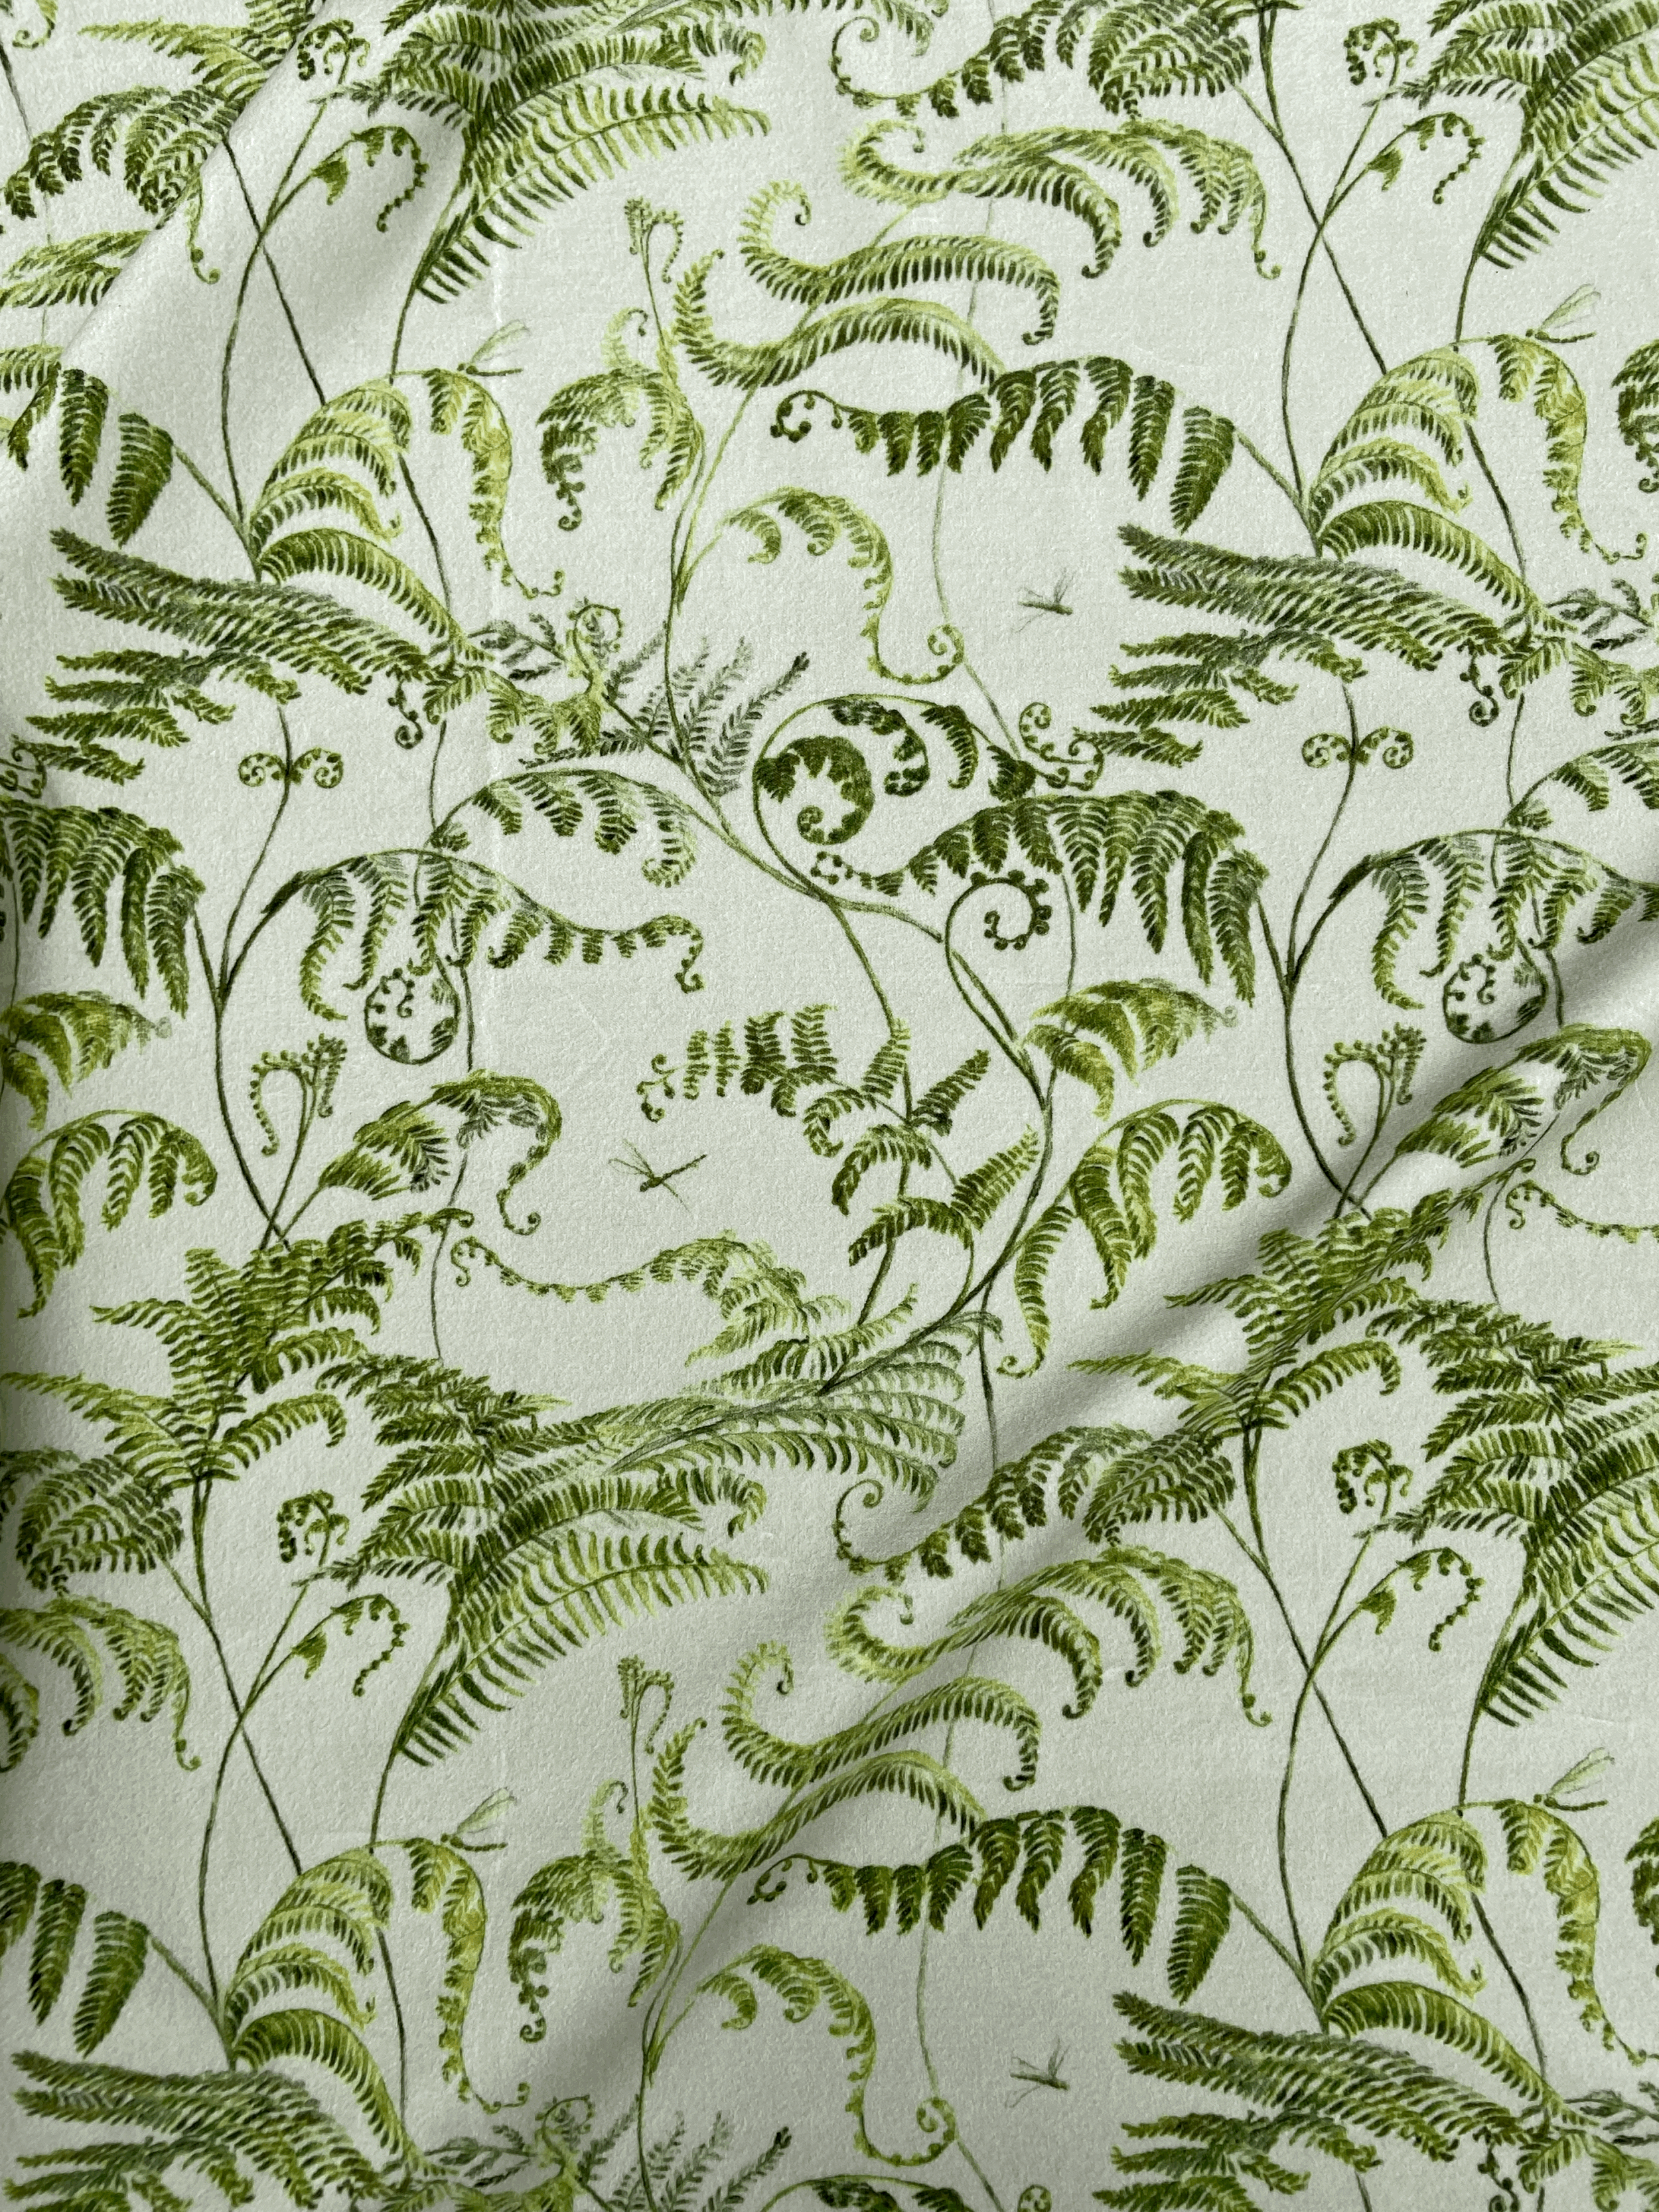 Katherine's Collection Fern Green Display Cover Fabric NEW 05-805443 Spice Trad 